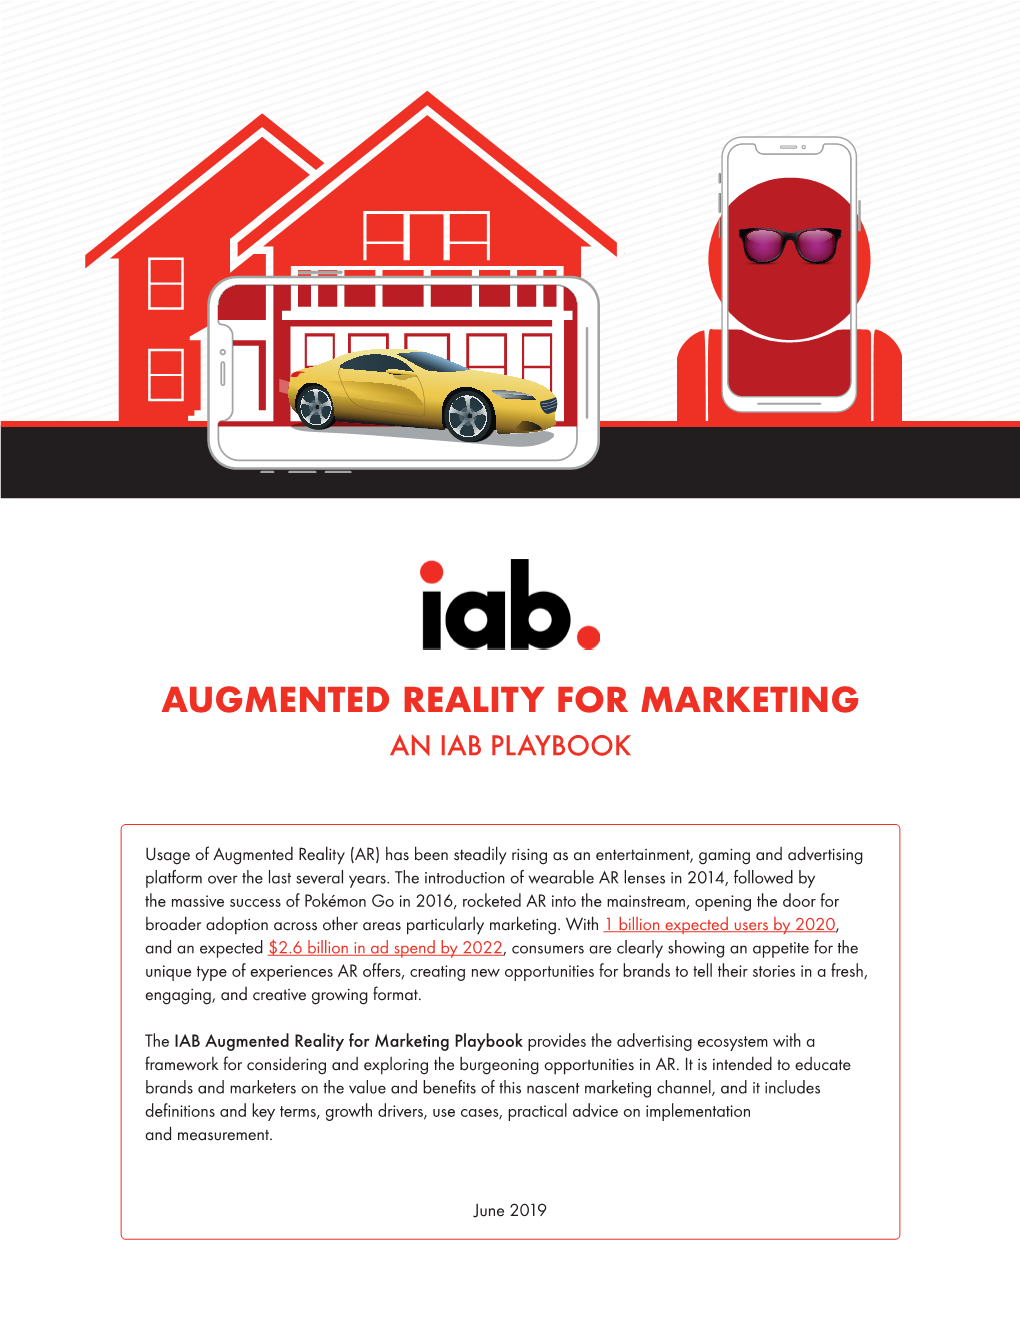 Augmented Reality for Marketing an Iab Playbook